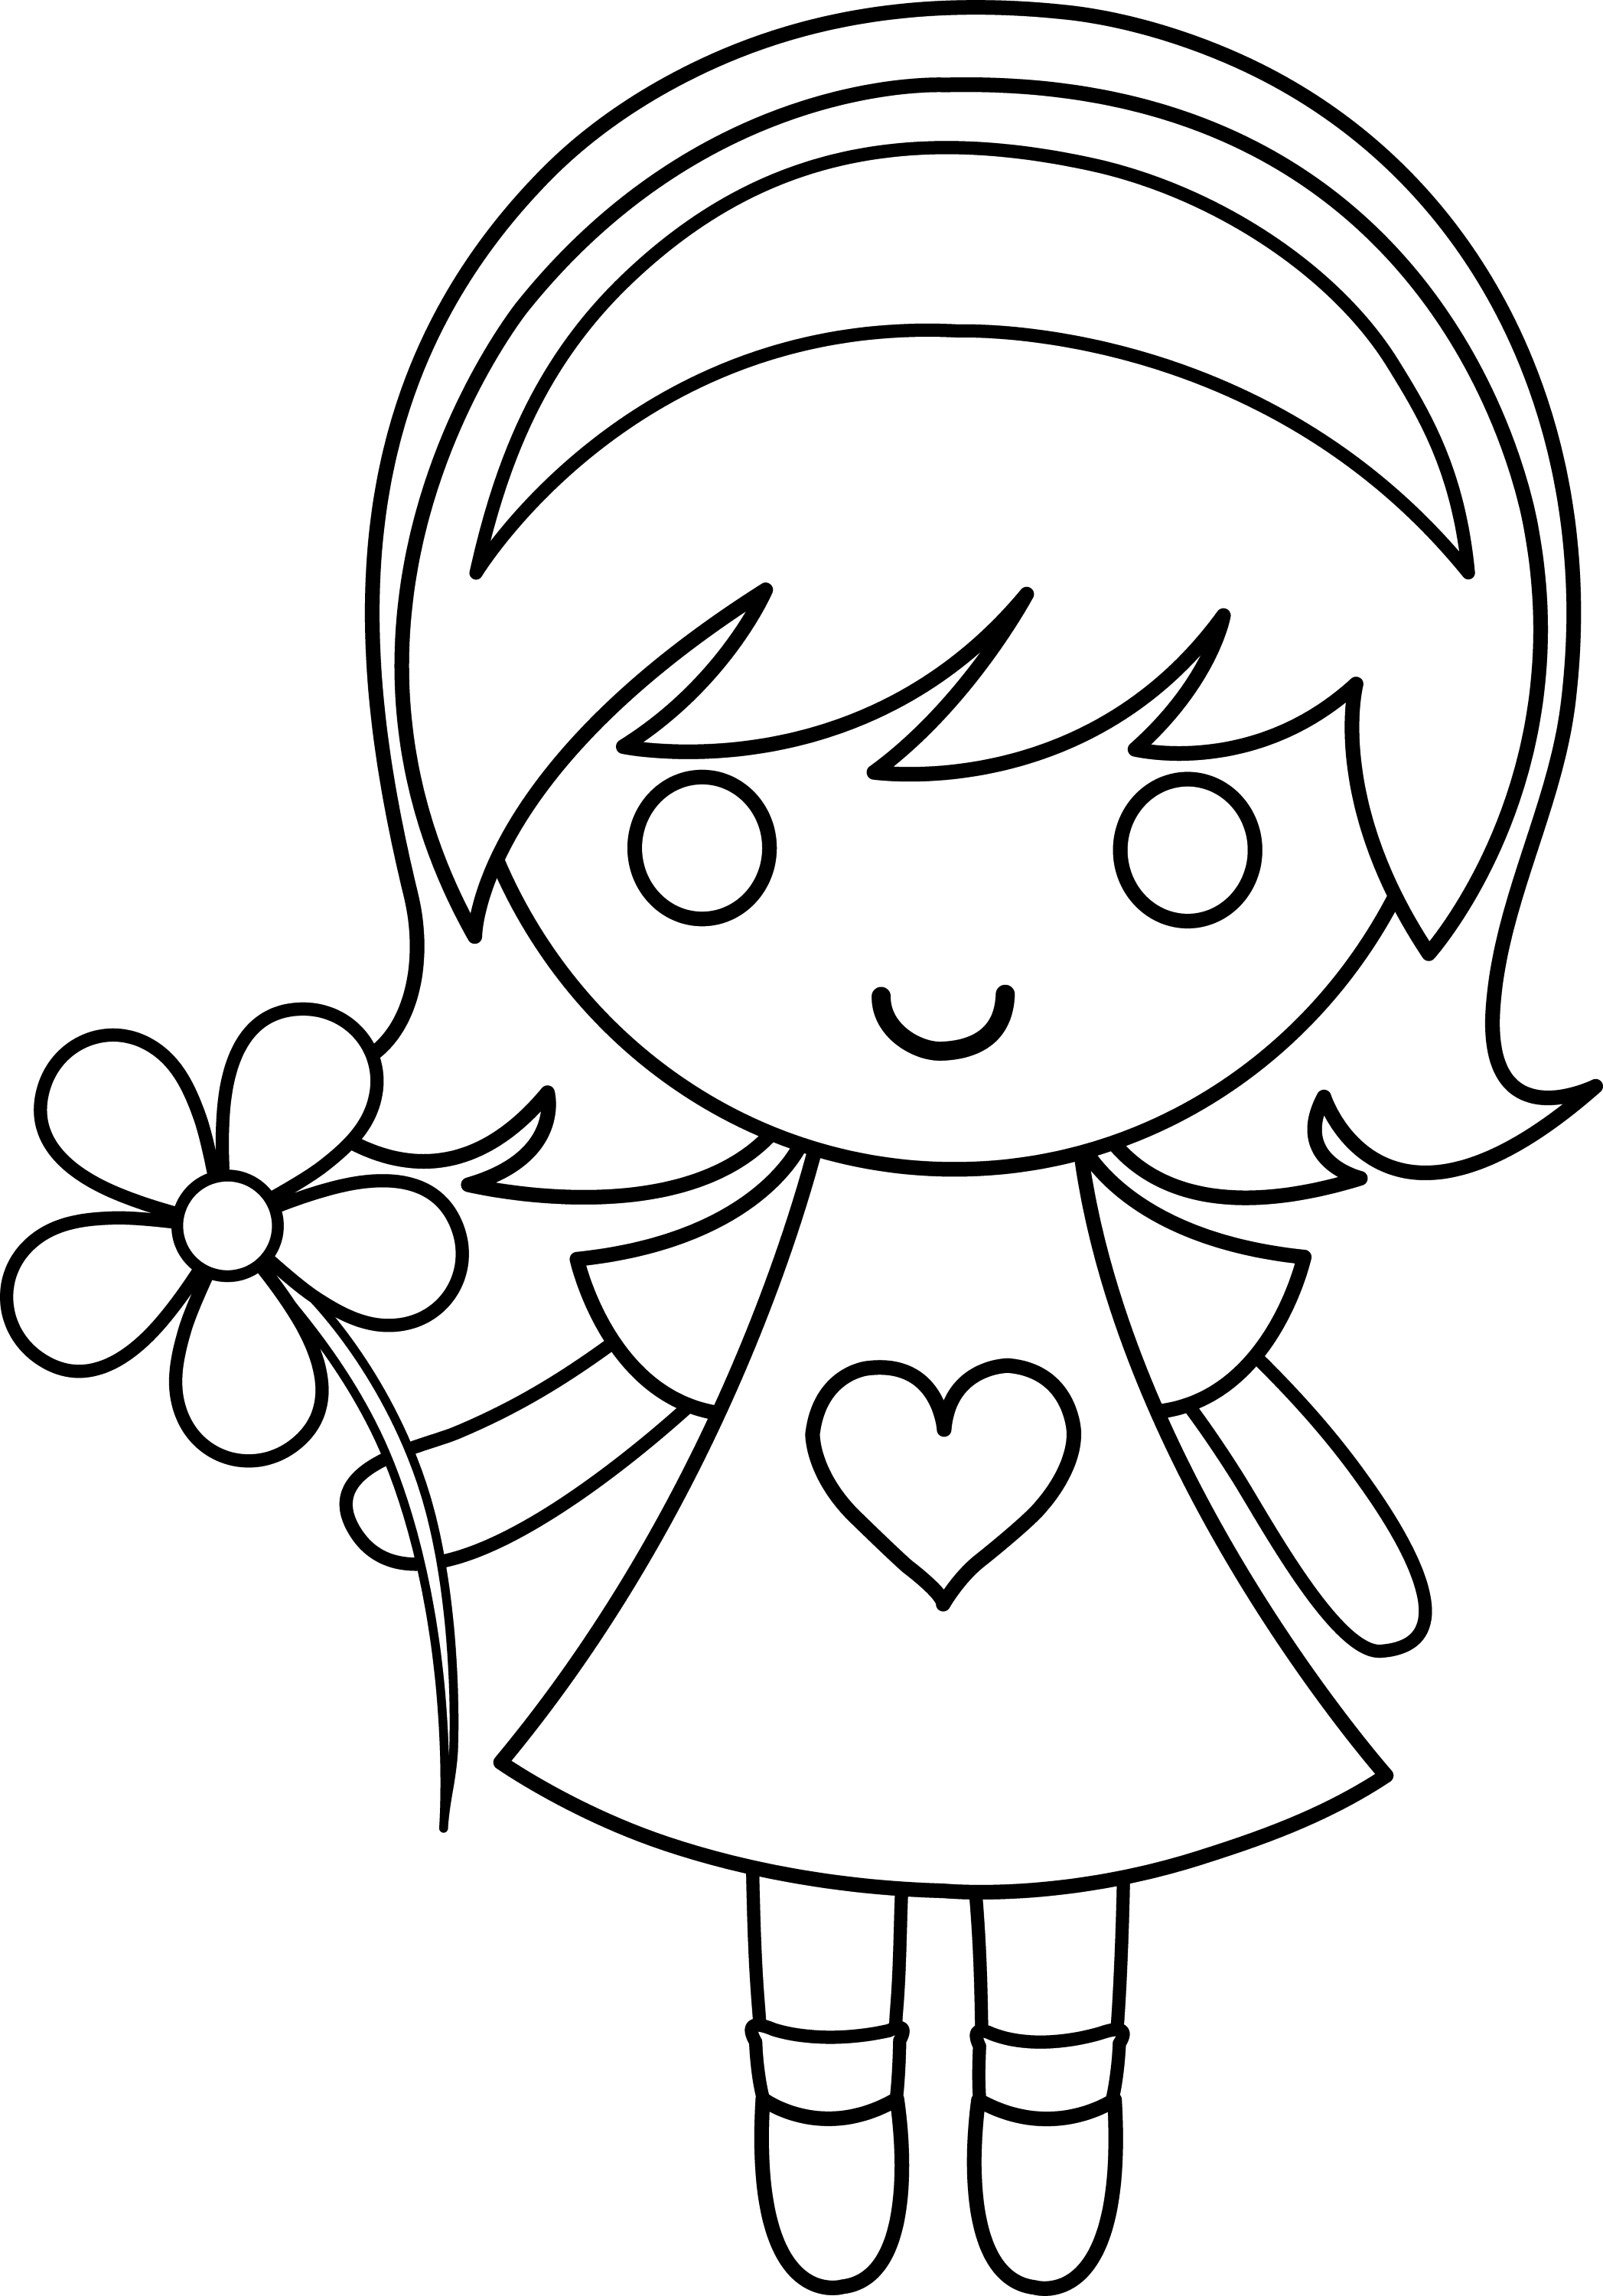 clip art free line drawings - photo #12